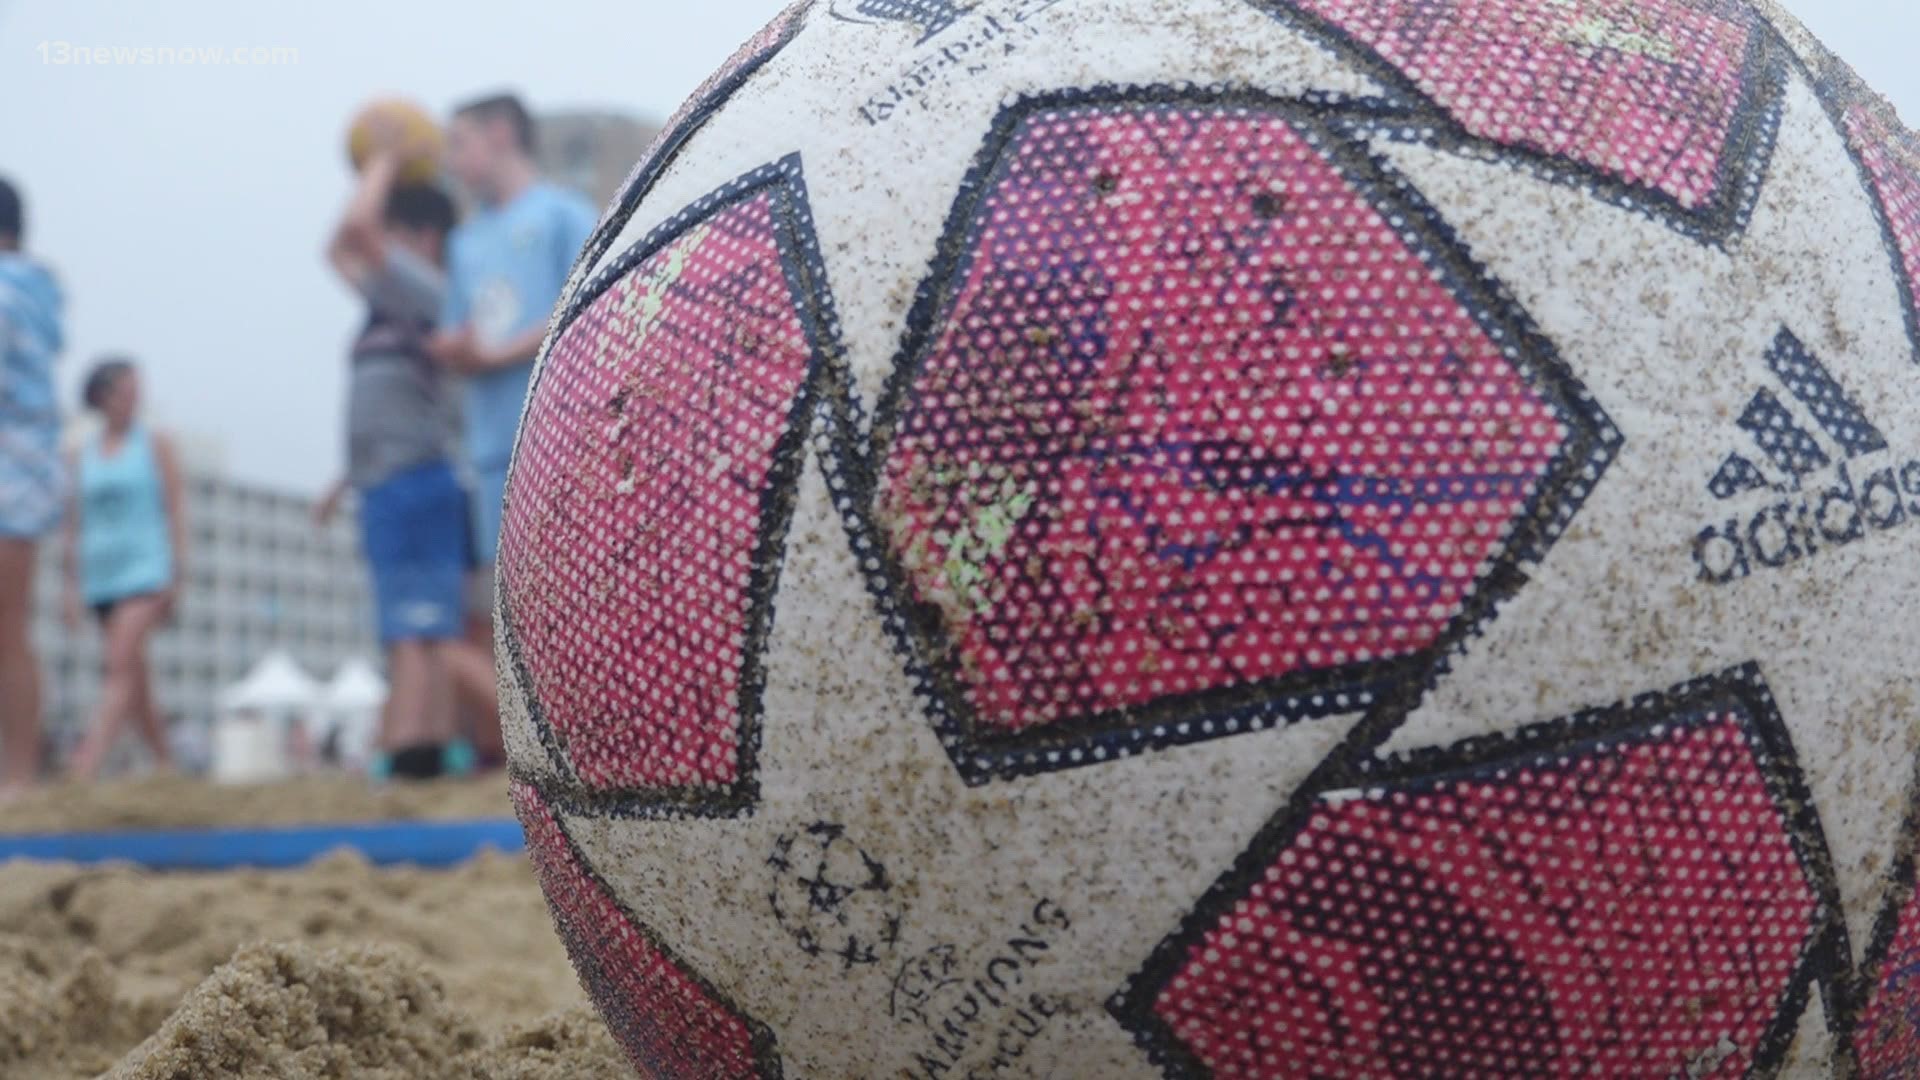 This weekend is the annual North American Sand Soccer Tournament at the Virginia Beach Oceanfront!